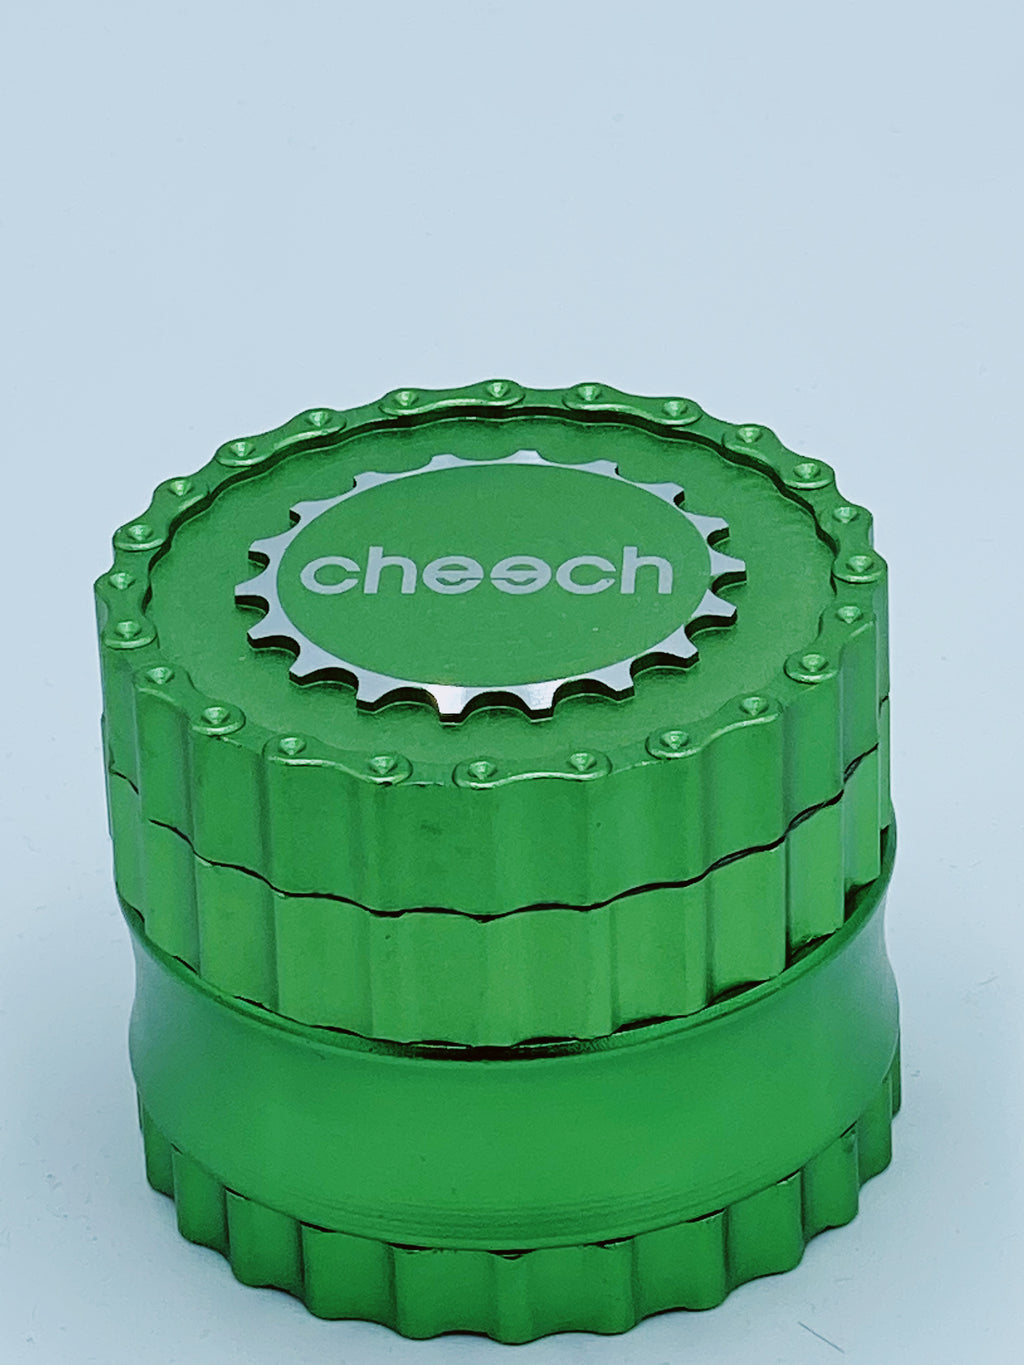 CHEECH GREEN GRINDER - Smoke Country - Land of the artistic glass blown bongs